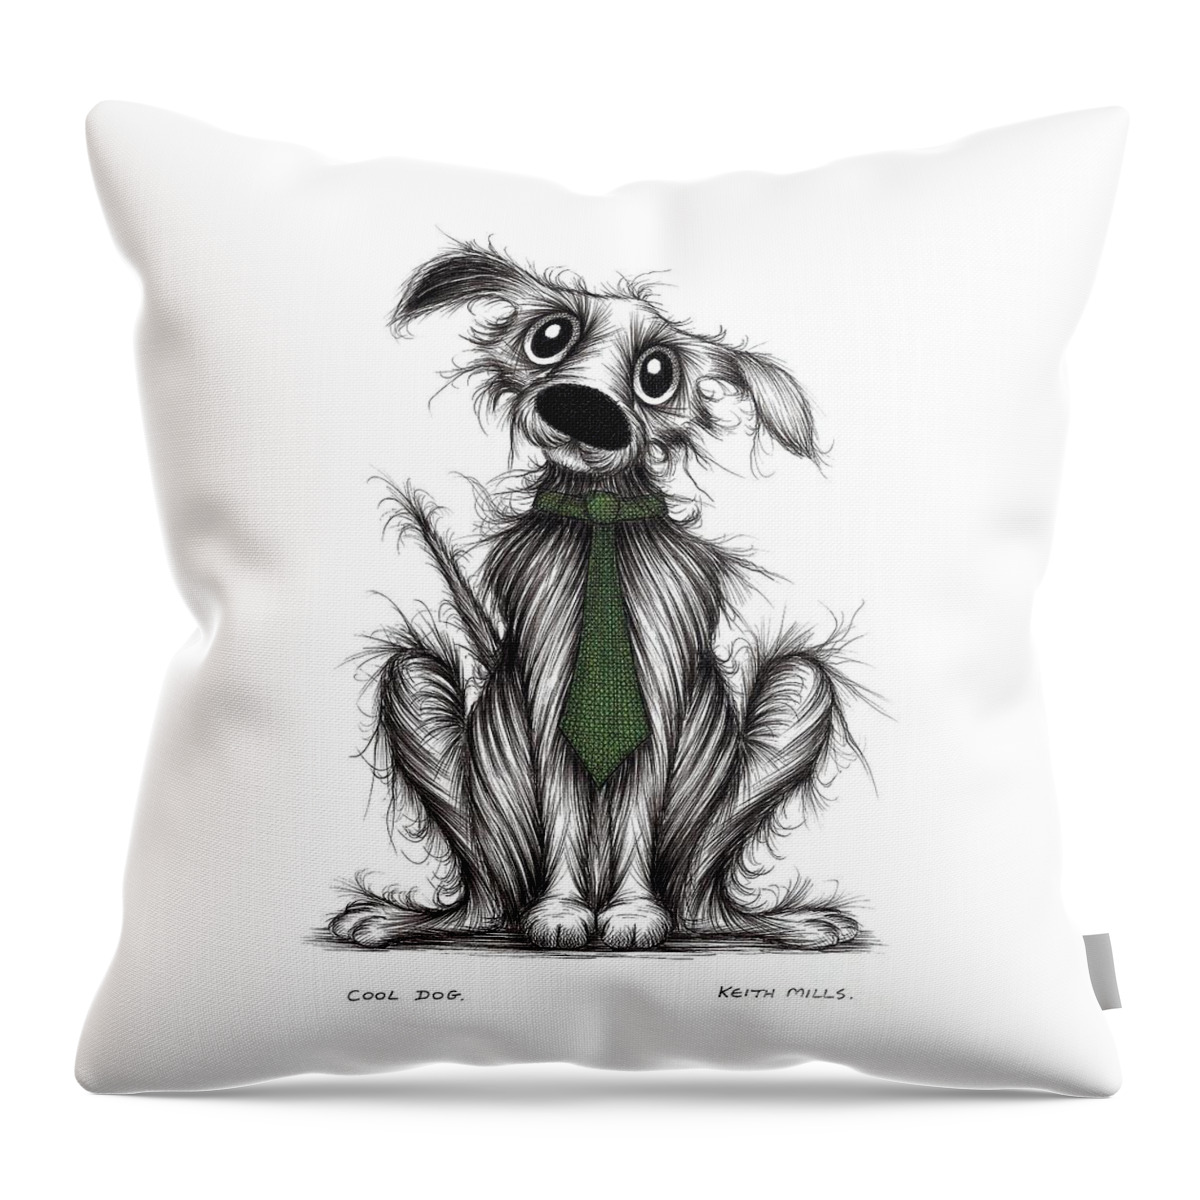 Handsome Pooch Throw Pillow featuring the drawing Cool dog by Keith Mills